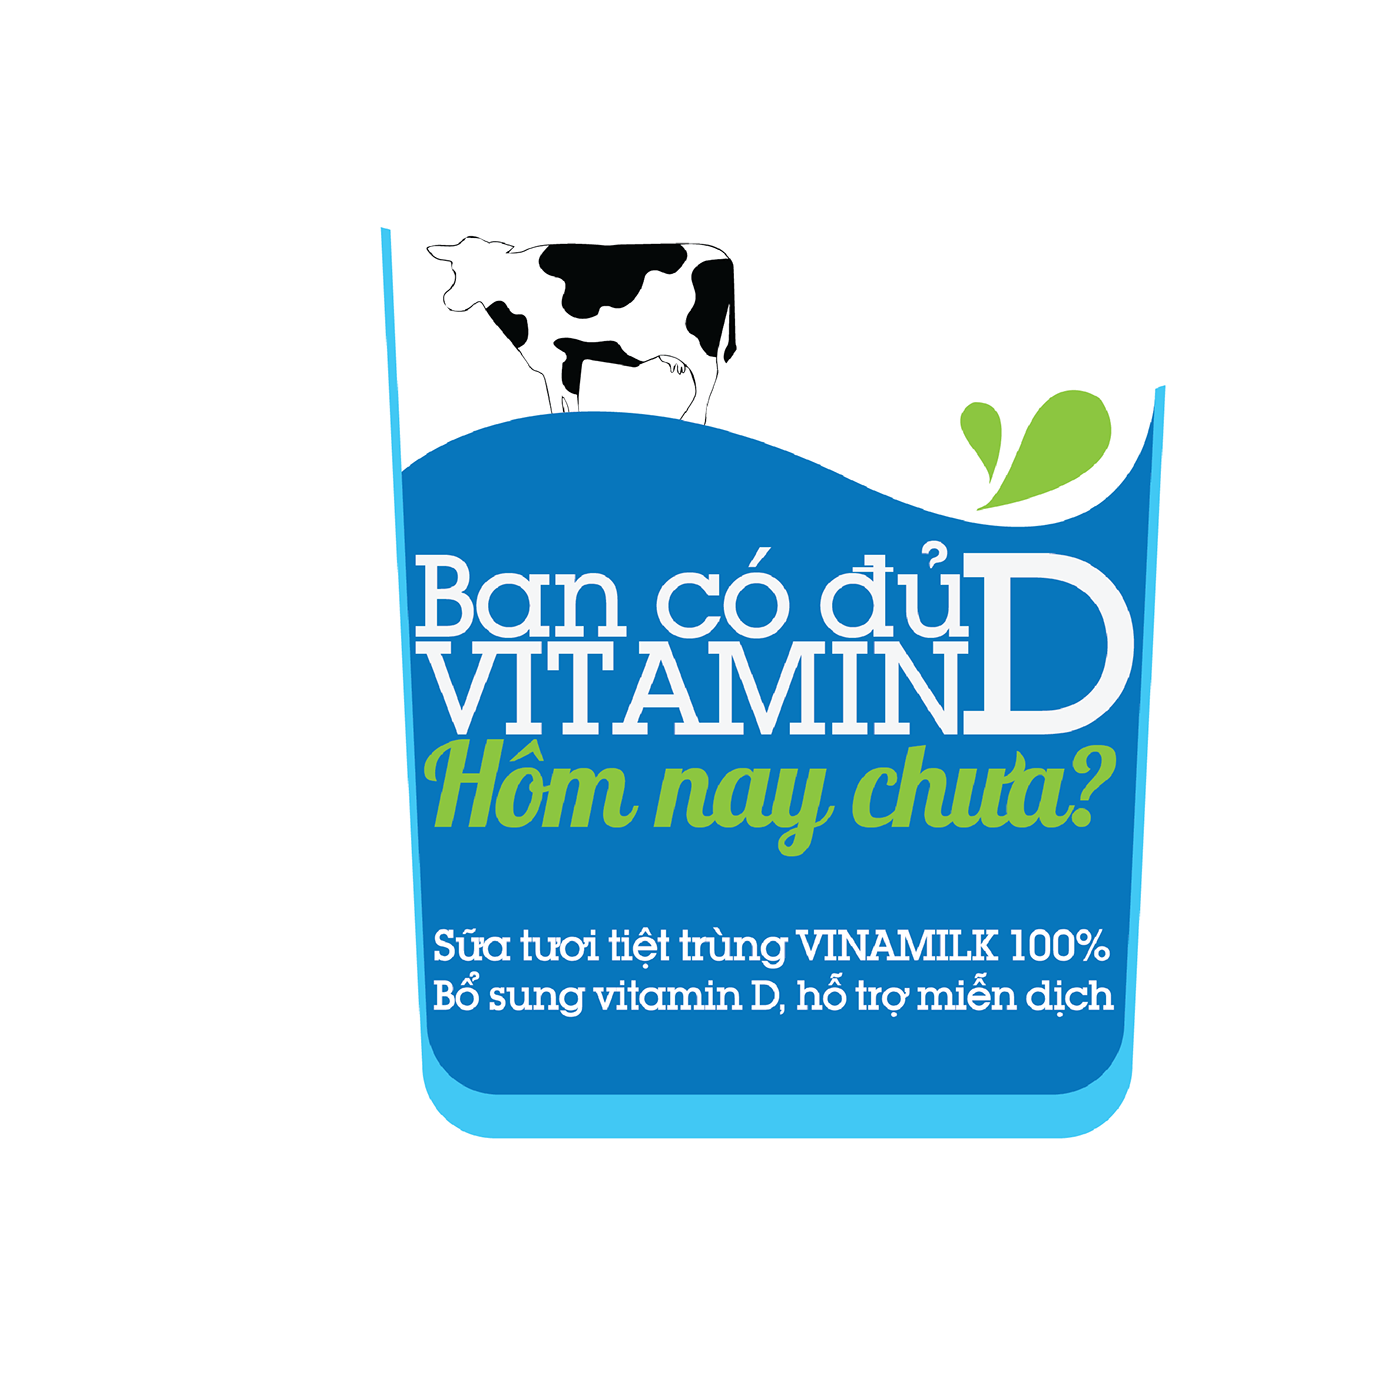 Vietnam Dairy Products on For